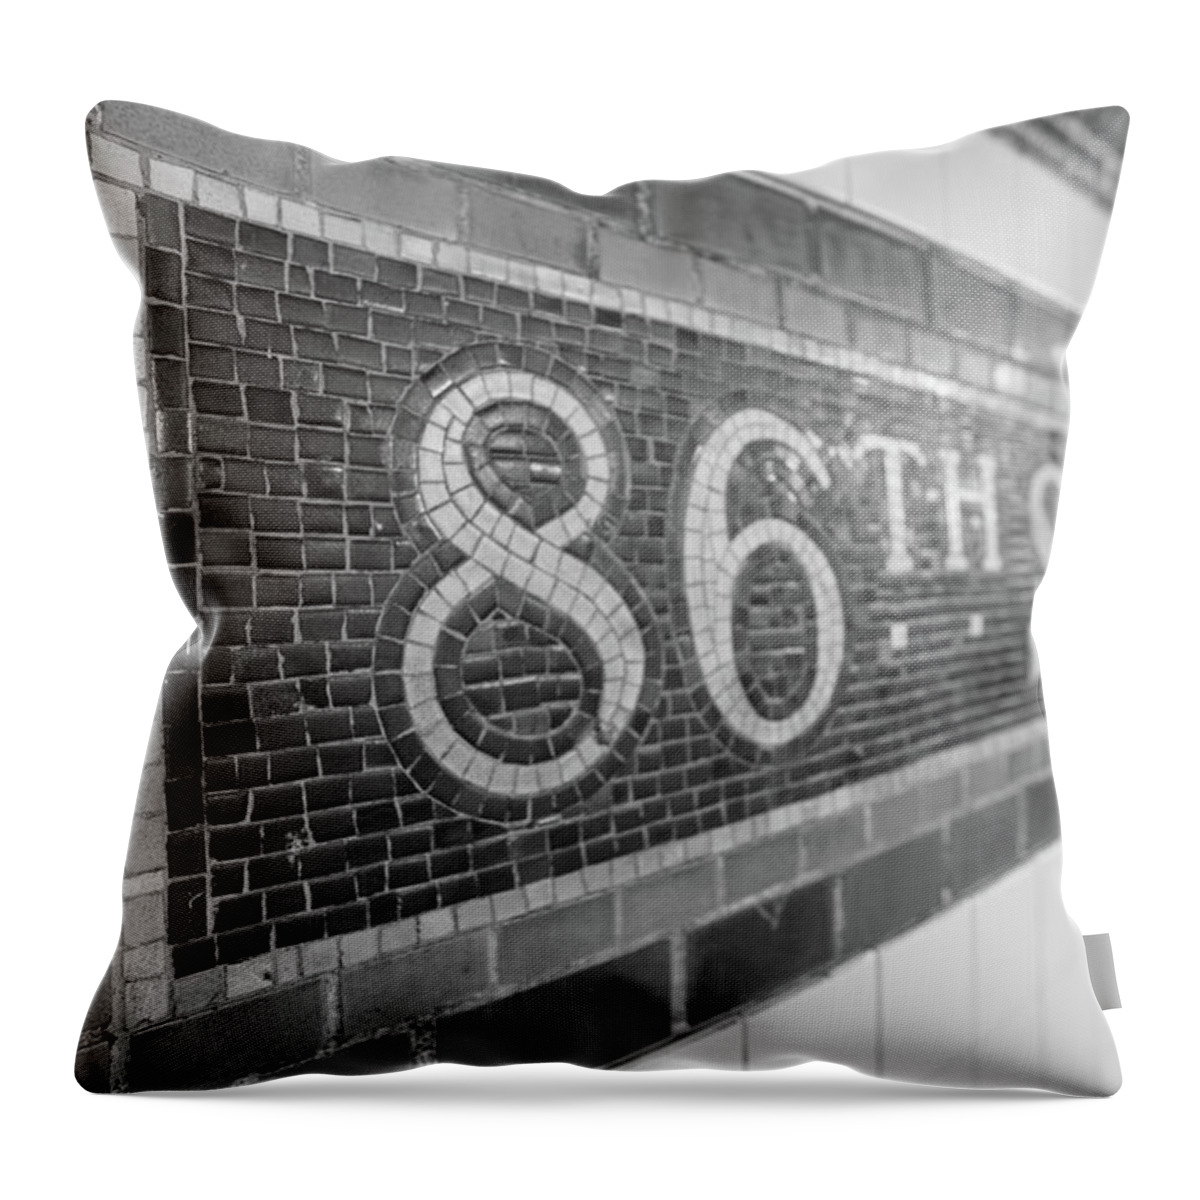 86th Street Throw Pillow featuring the photograph 86th Street Subway by John McGraw